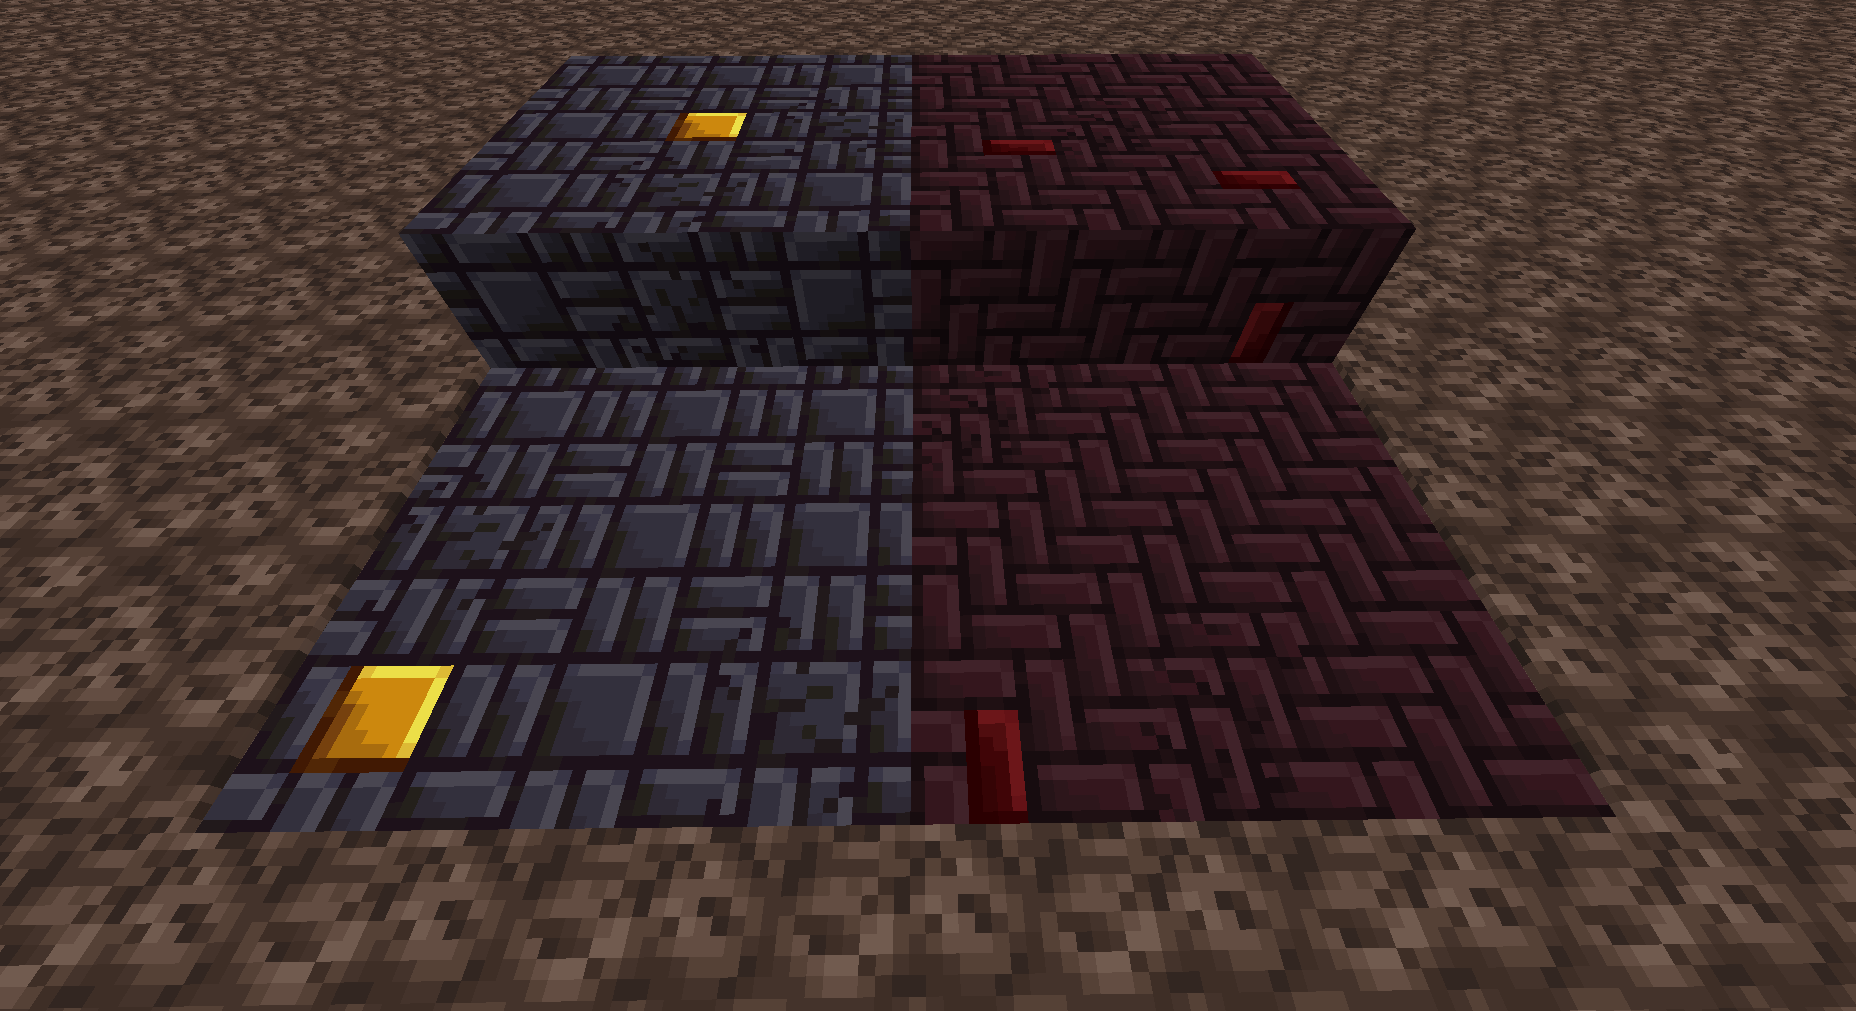 Paved Nether Paths